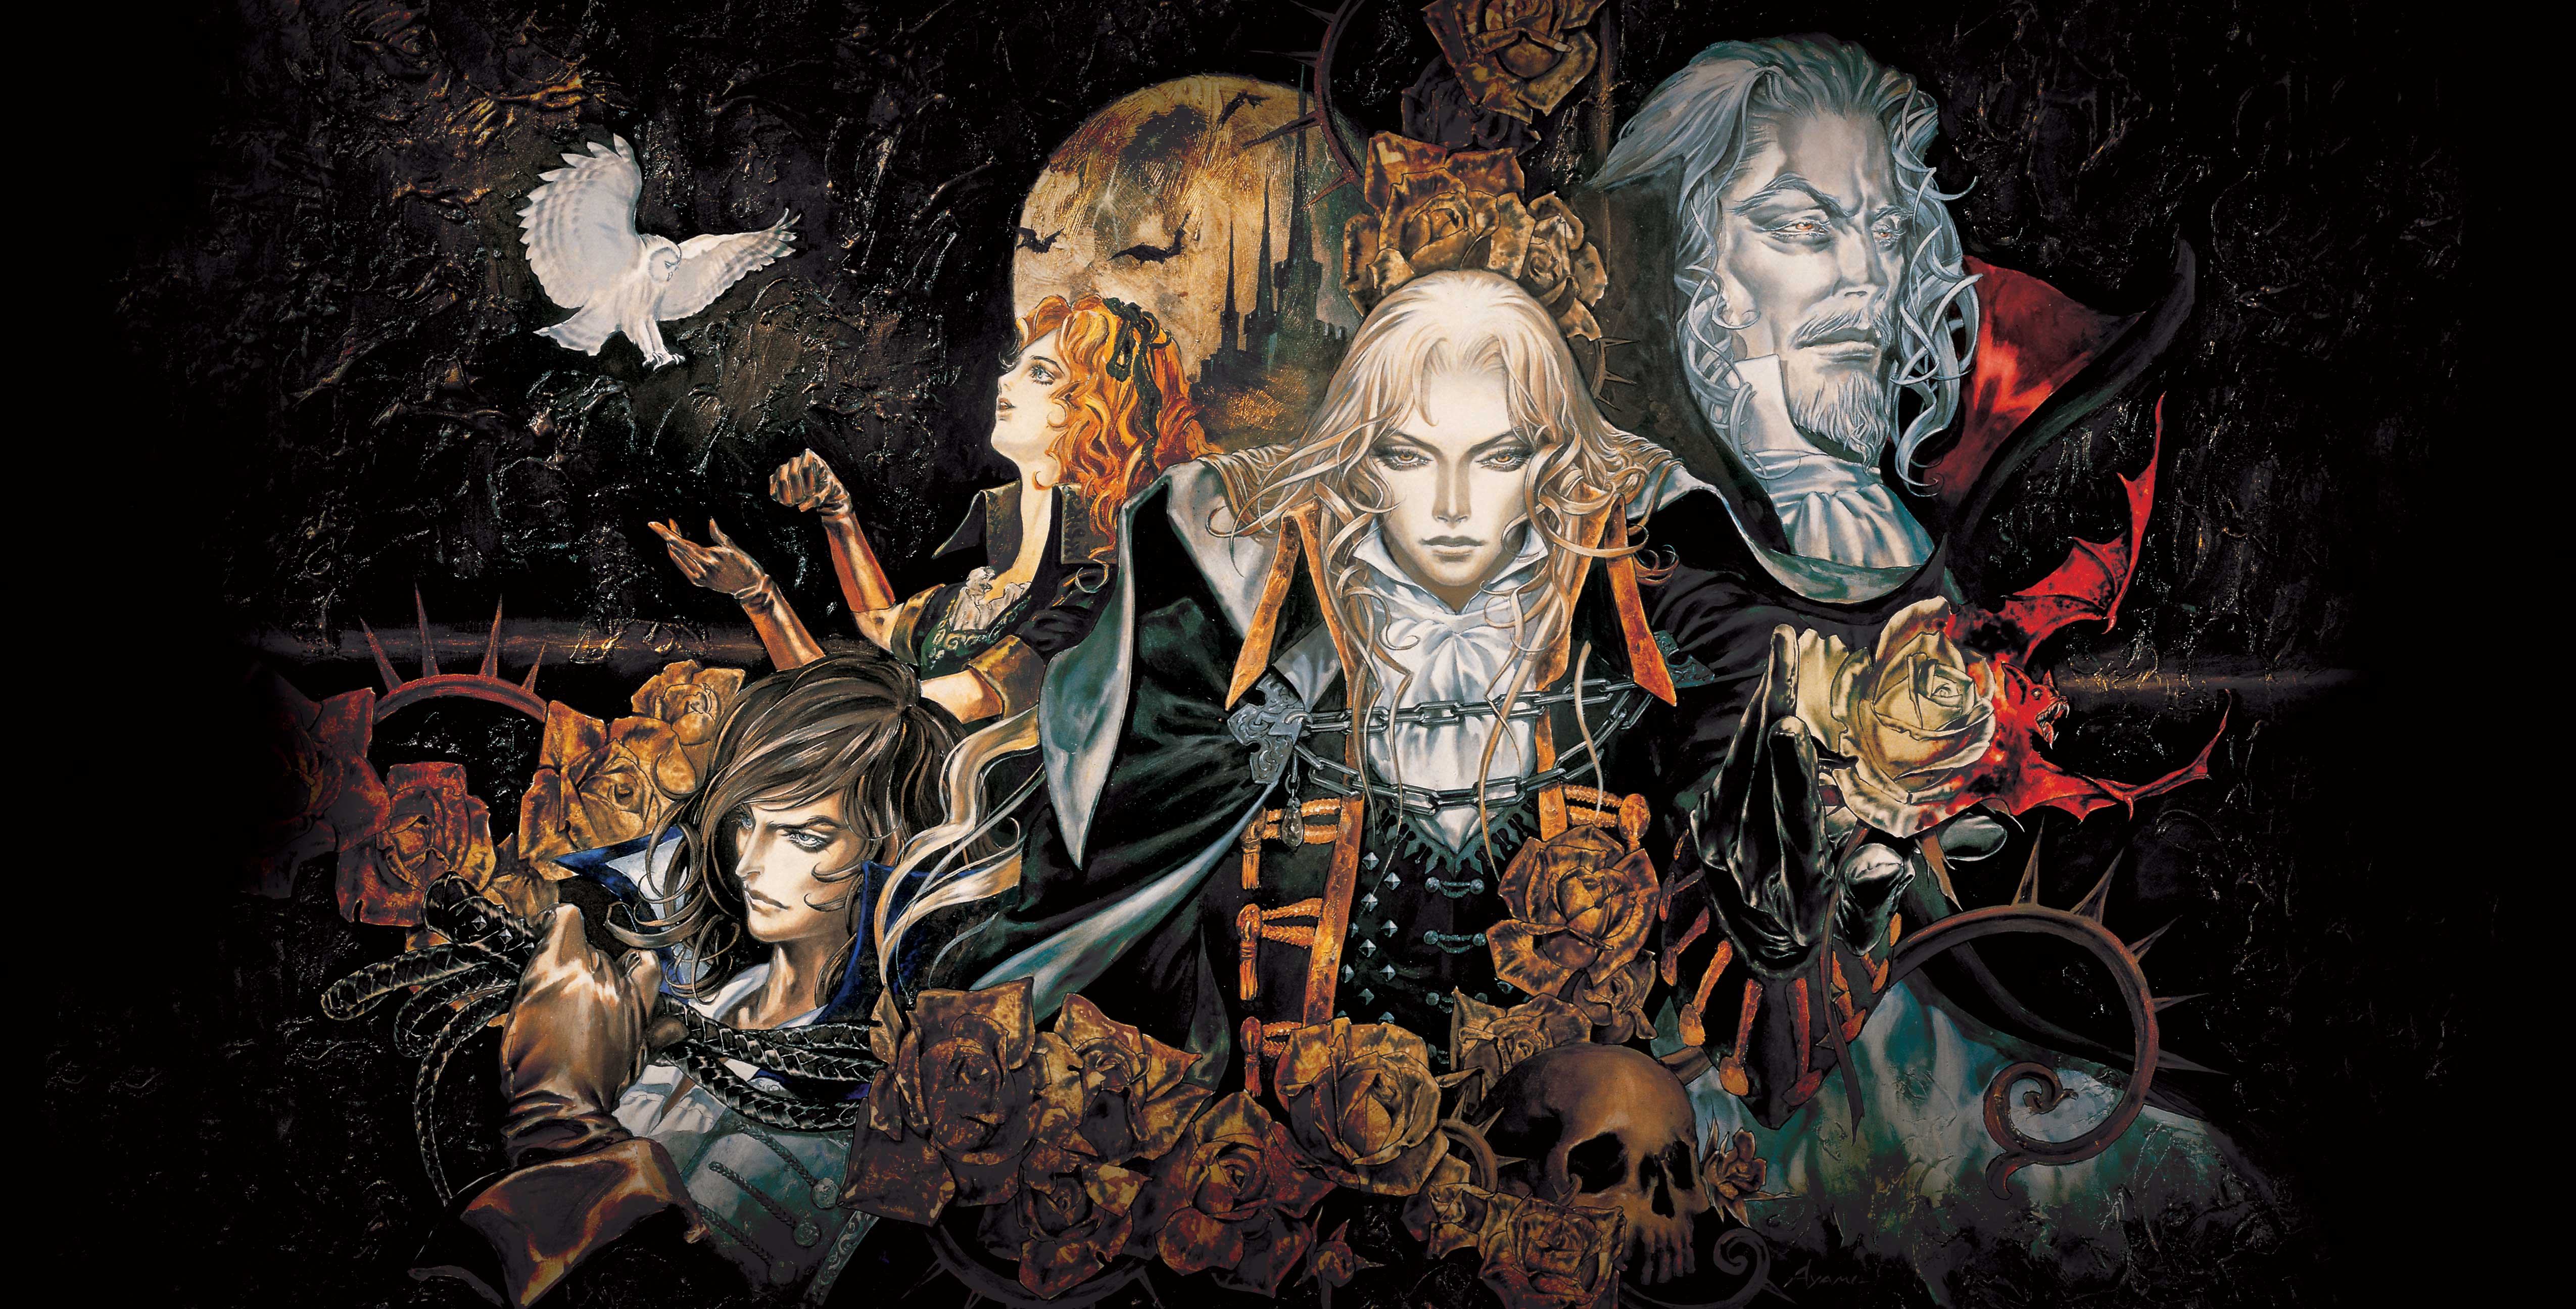 Castlvania: Symphony of the Night And Castlevania: Rondo of Blood Headed to PS4